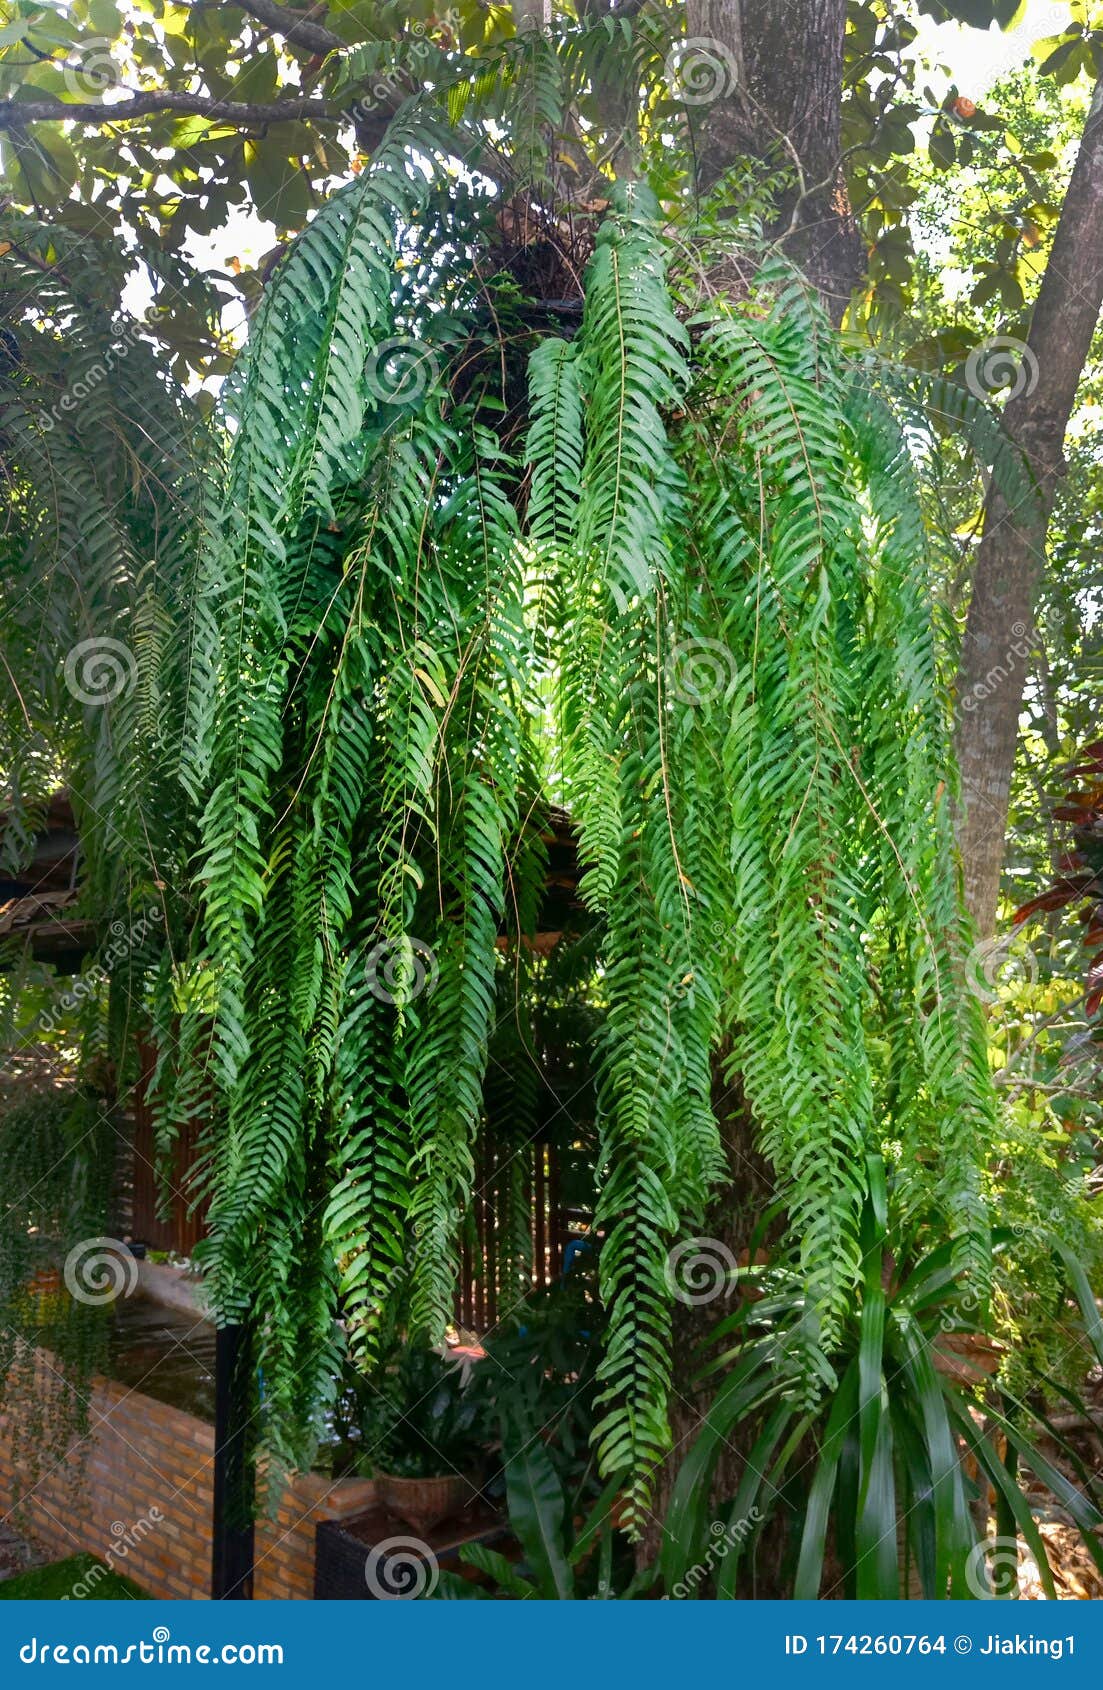 hanging nephrolepis cordifolia fern in thailand